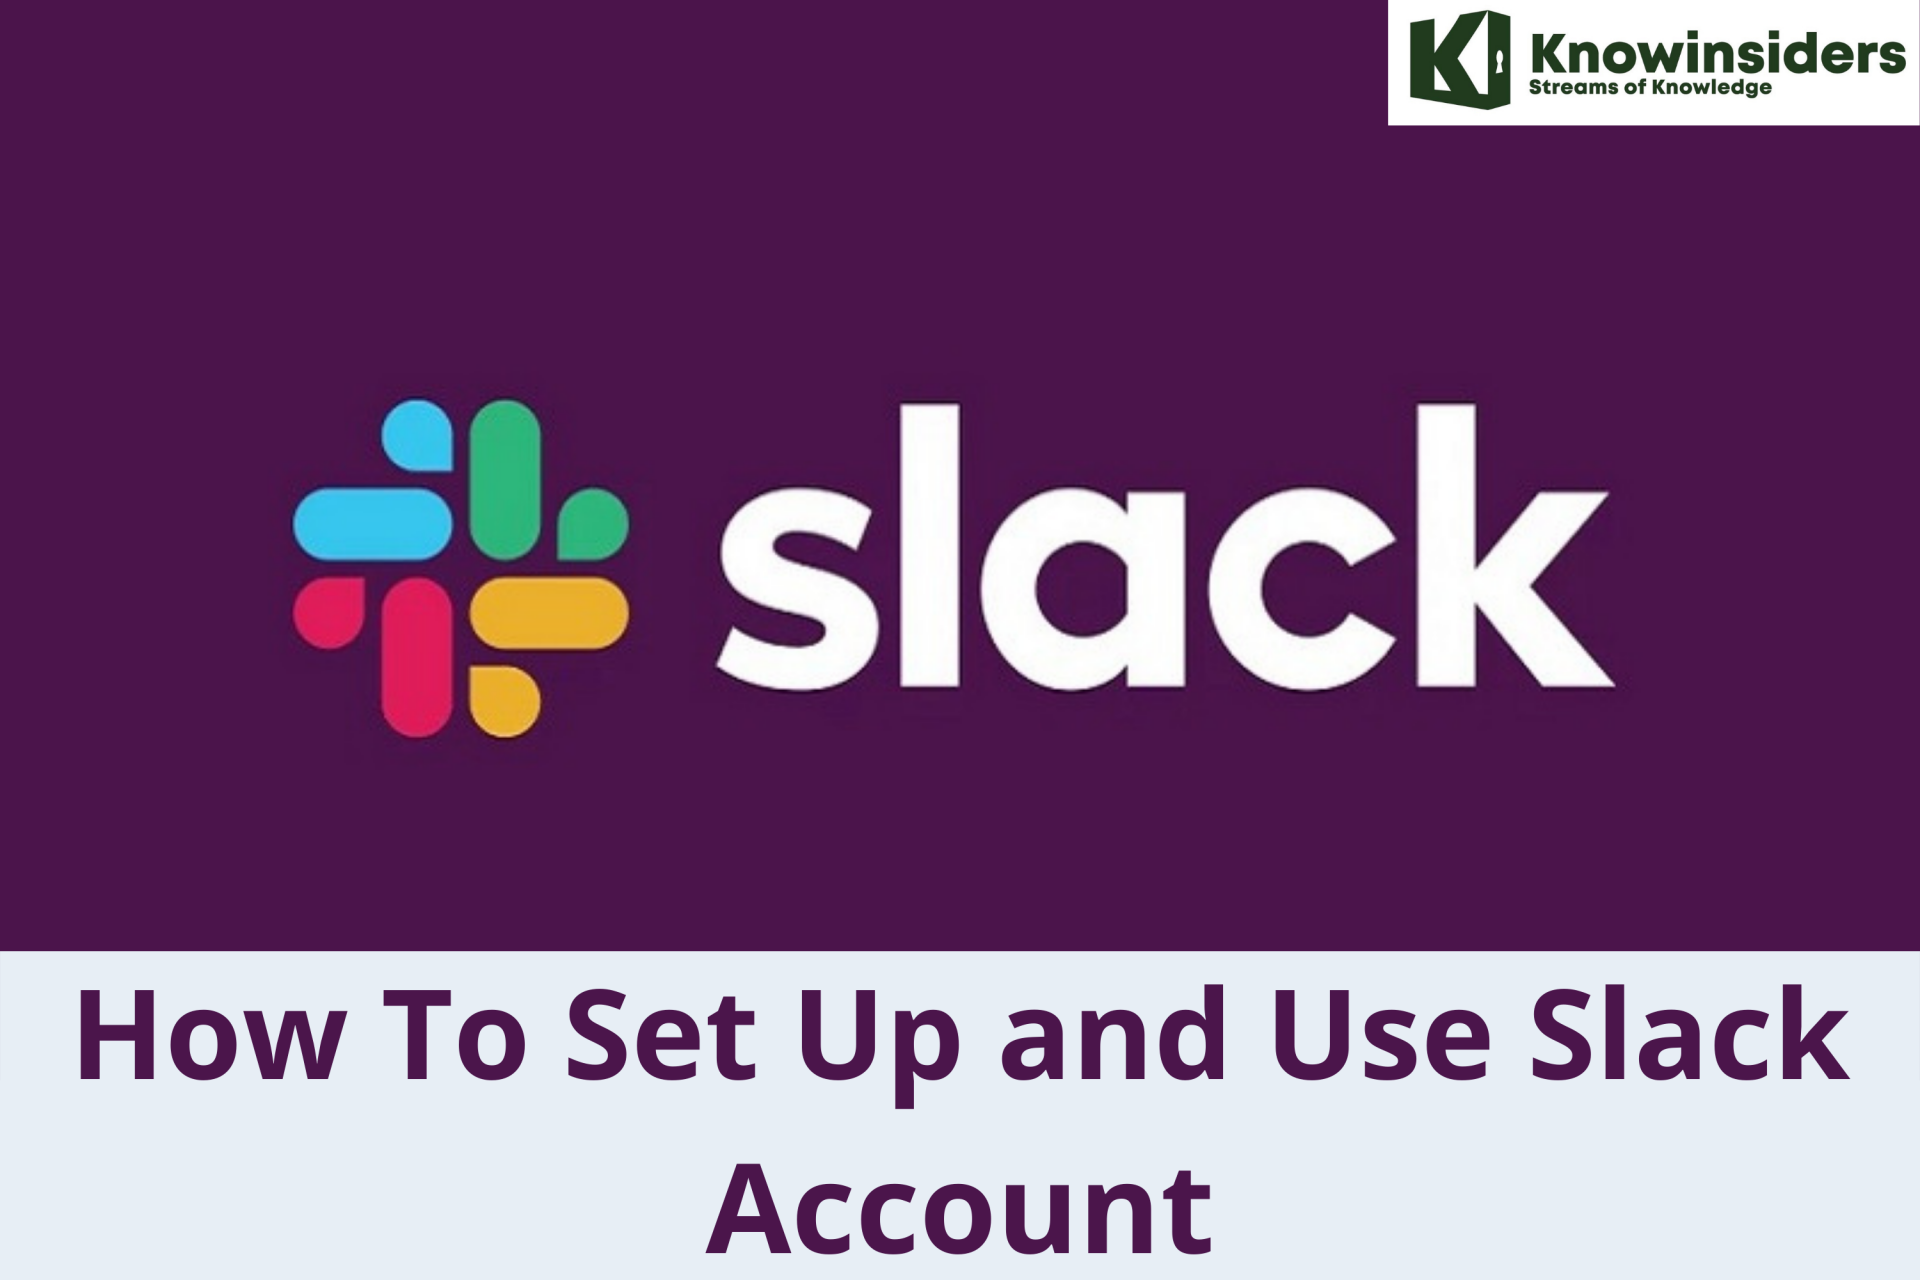 how-to-set-up-and-use-slack-account-channel-knowinsiders